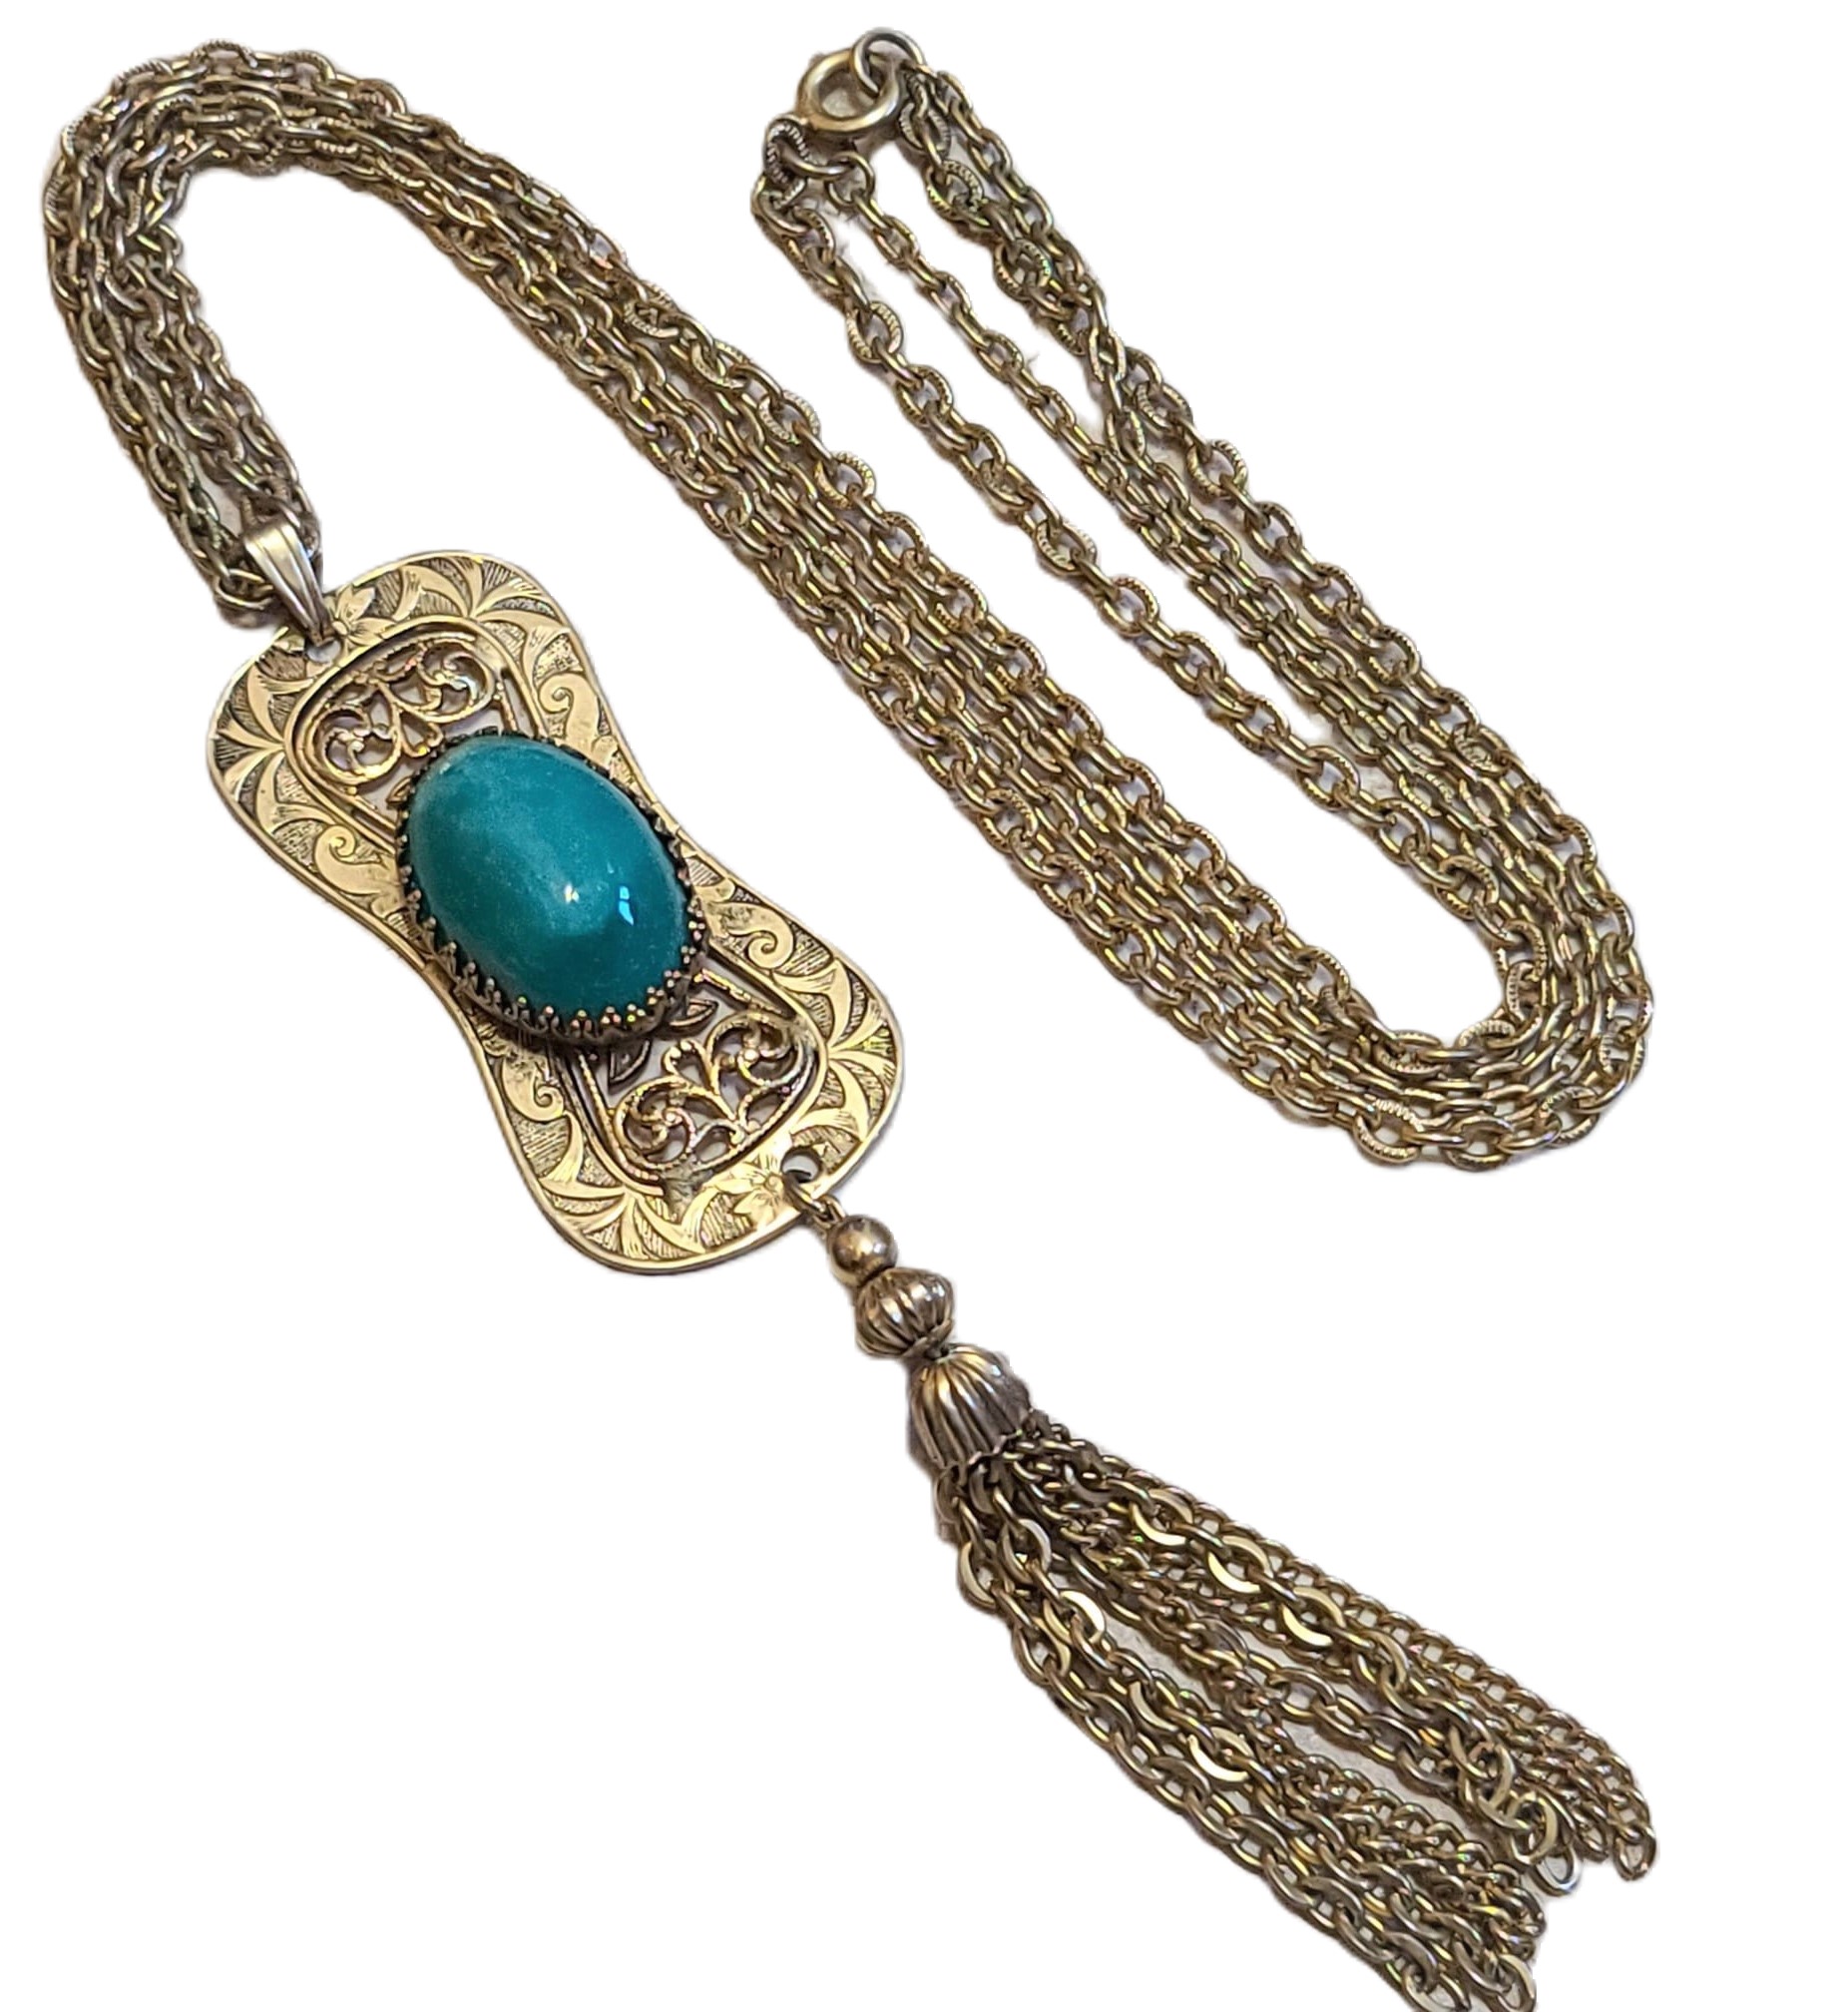 Asian Filigree with Green Cabachon 24" Tassel Necklace